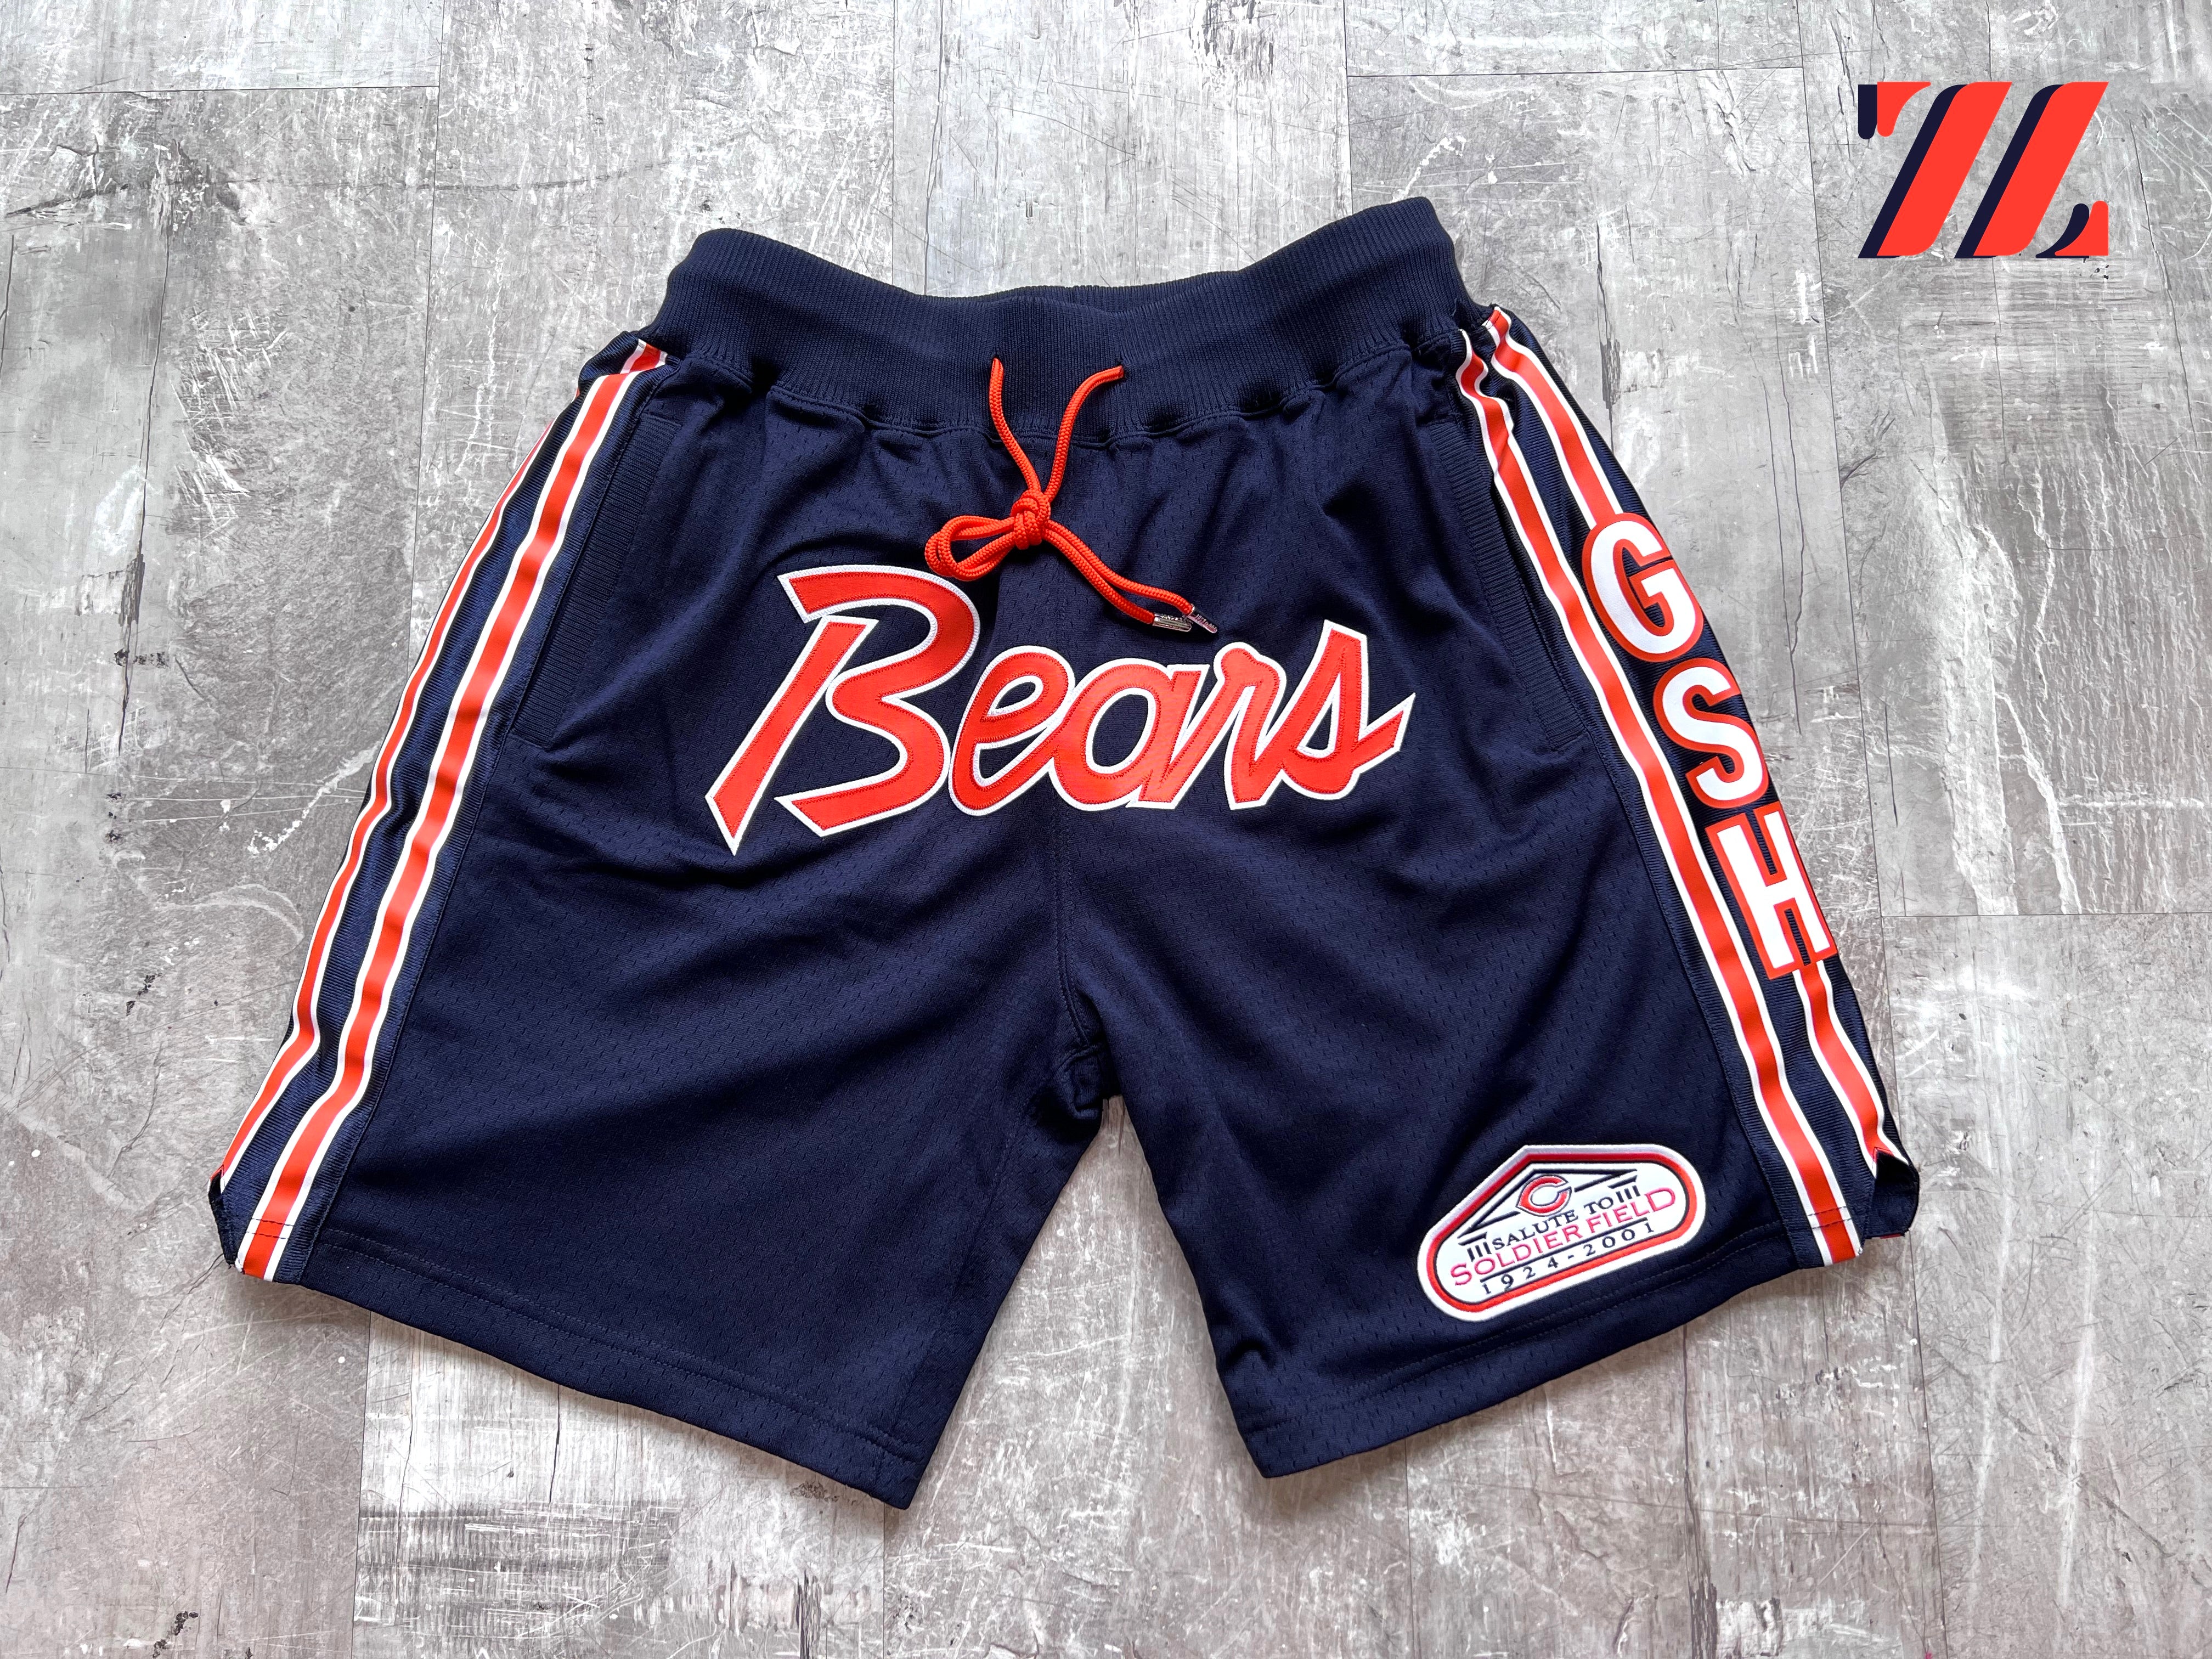 Men’s Mitchell & Ness Just Don Chicago Bears Shorts